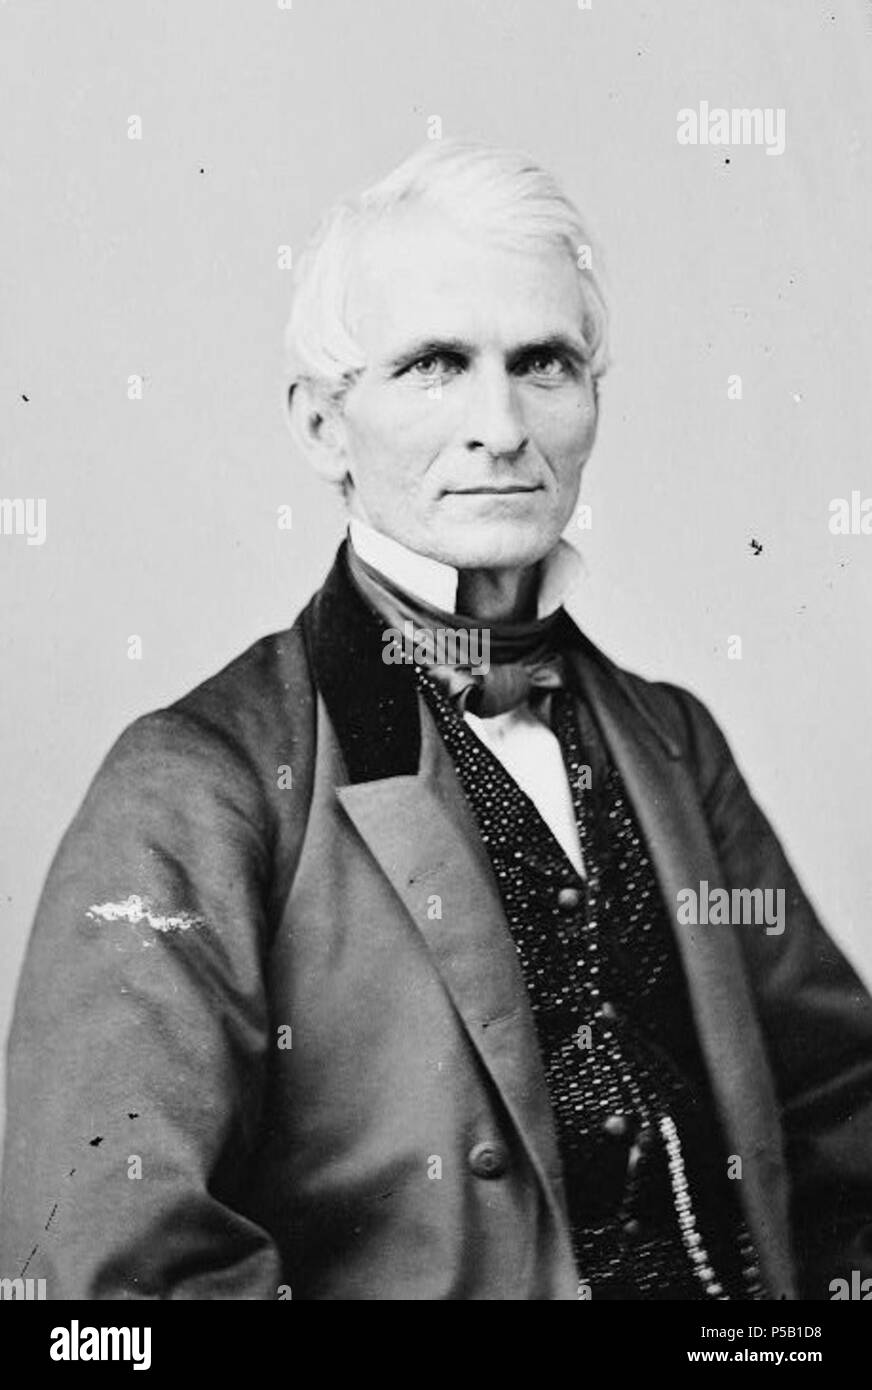 N/A. English: Photograph of Asahel W. Hubbard, an attorney, judge, Indiana legislator, and three-term Republican U.S. Representative from Iowa's 6th congressional district during the Civil War and the first stage of the Reconstruction era.(This version cropped to remove unexposed sections. between 1855 and 1865.   Mathew Brady  (1822–1896)      Description American photographer, war photographer, photojournalist and journalist  Date of birth/death 18 May 1822 15 January 1896  Location of birth/death Warren County Manhattan  Work period from 1844 until circa 1887  Work location New York City, W Stock Photo